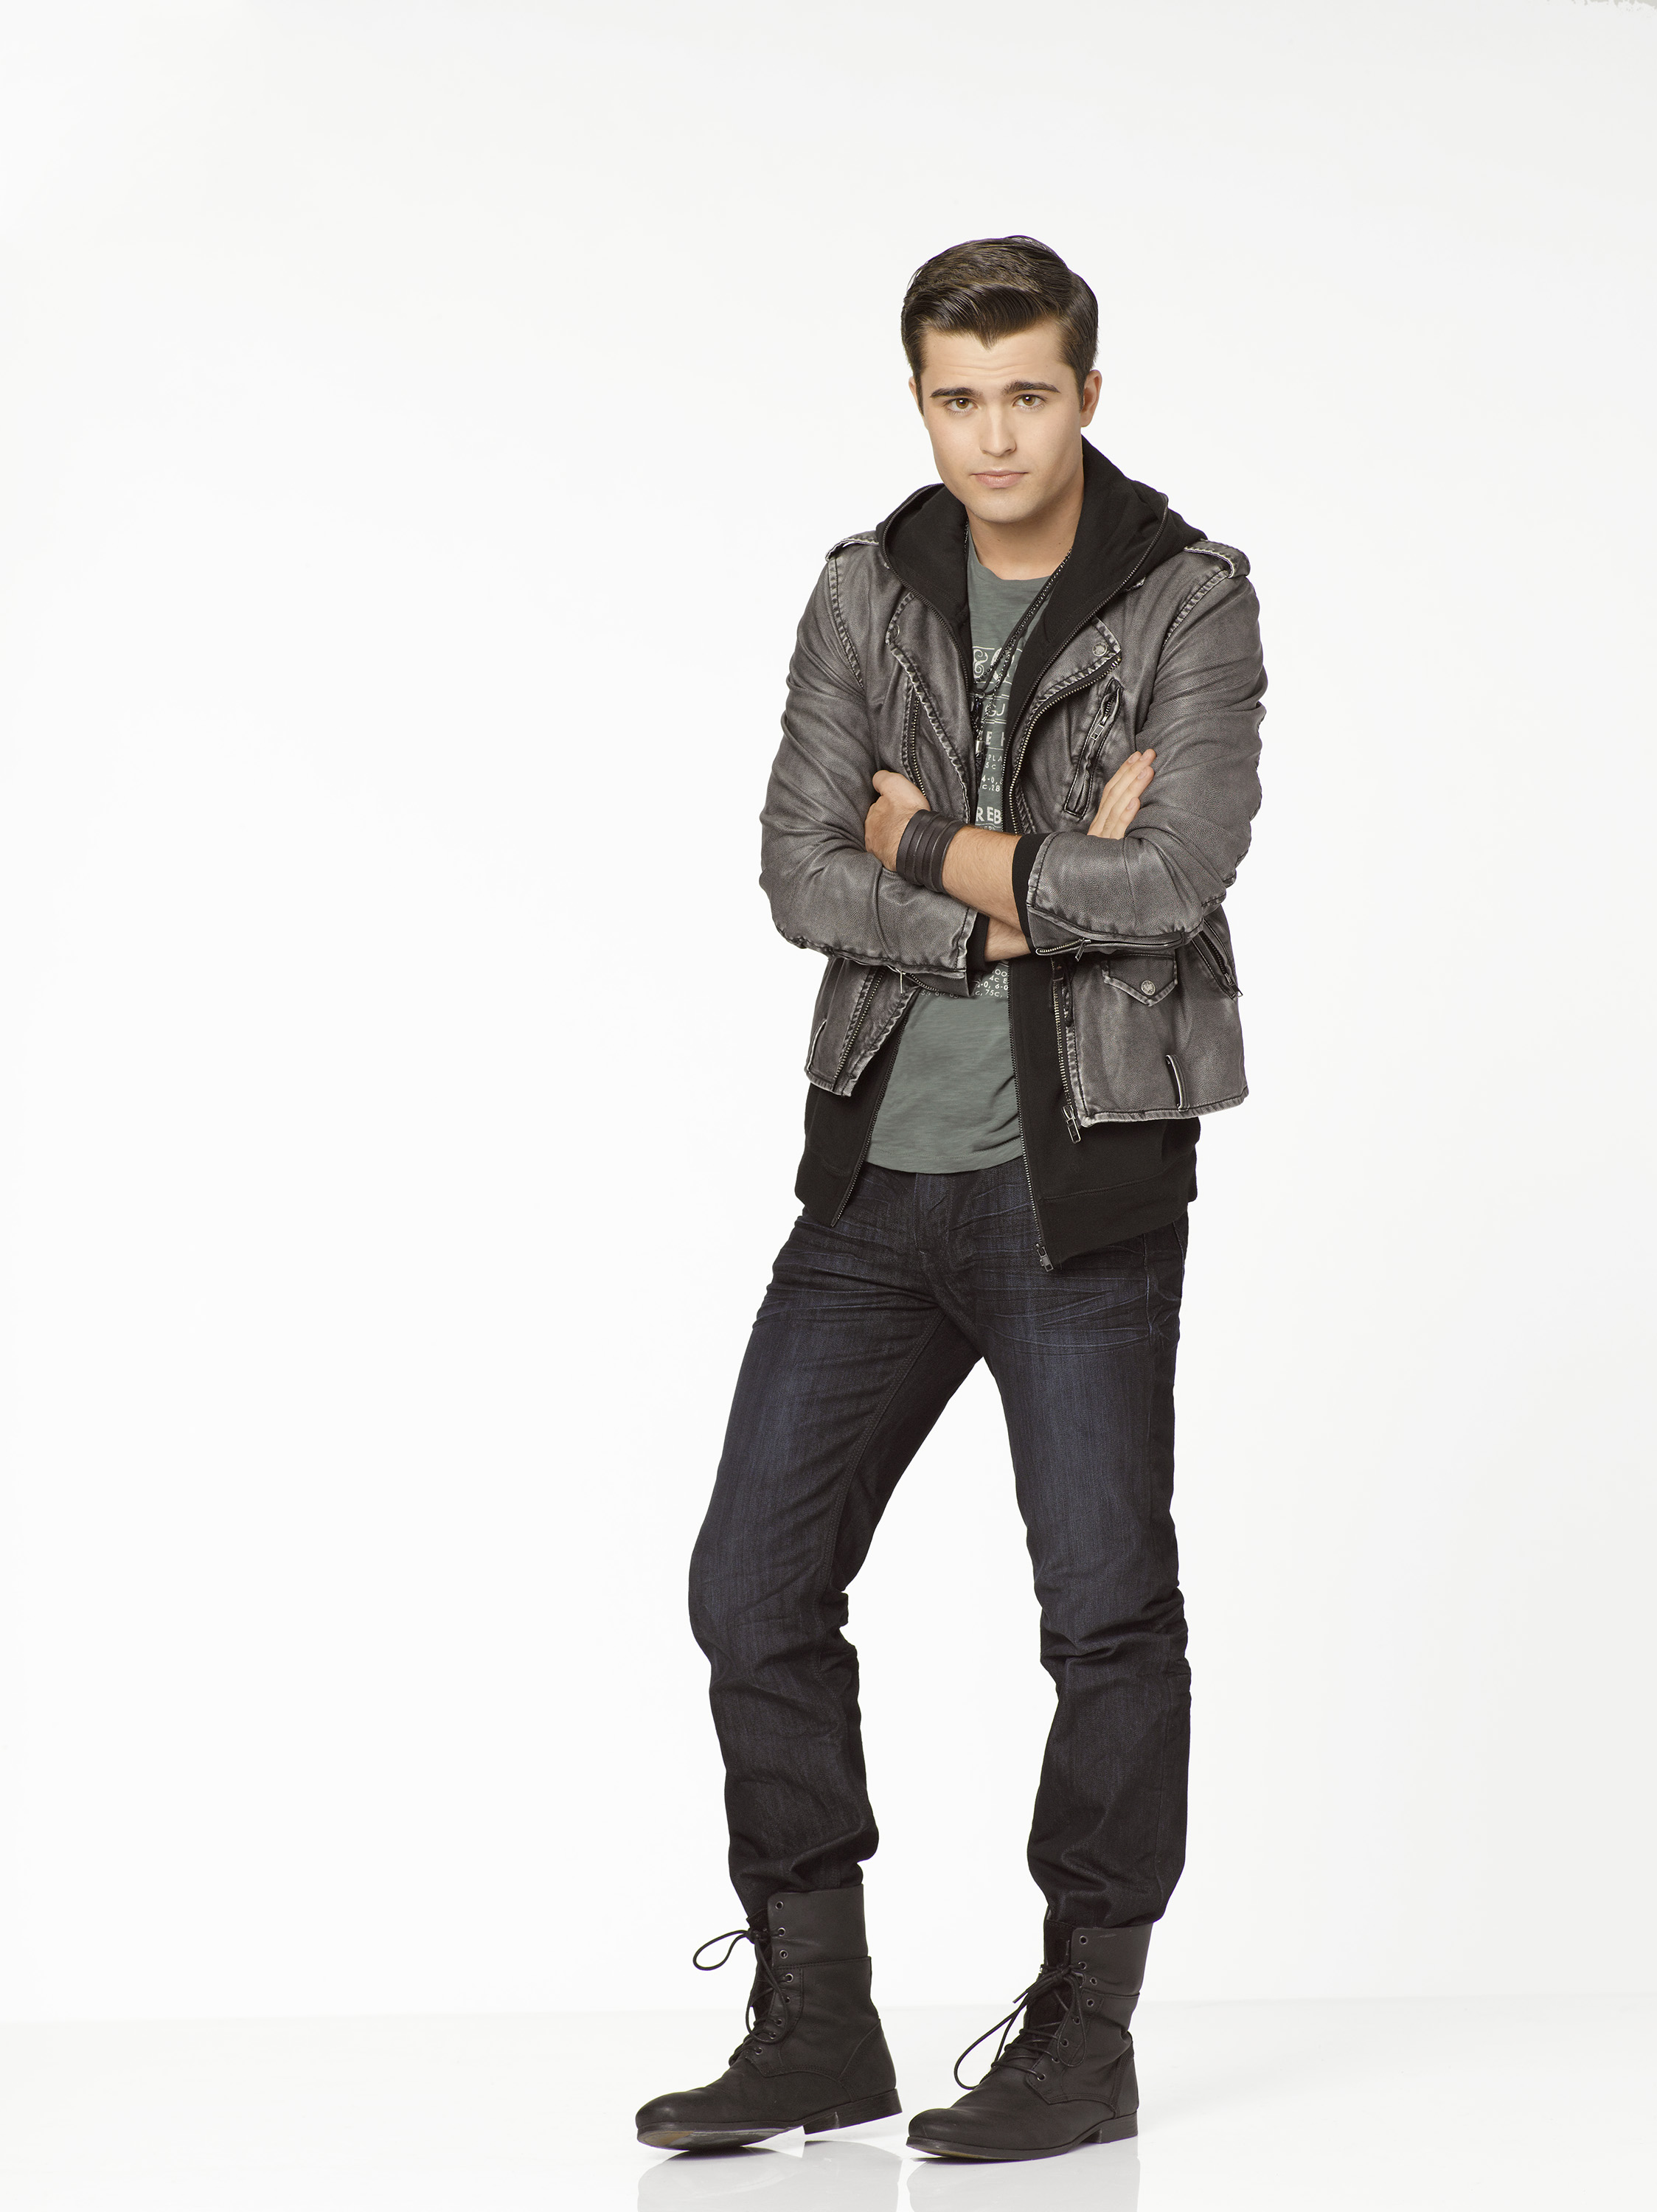 Spencer Boldman discusses Family Channel’s new movie Zapped « Celebrity Gossip and ...2247 x 3000